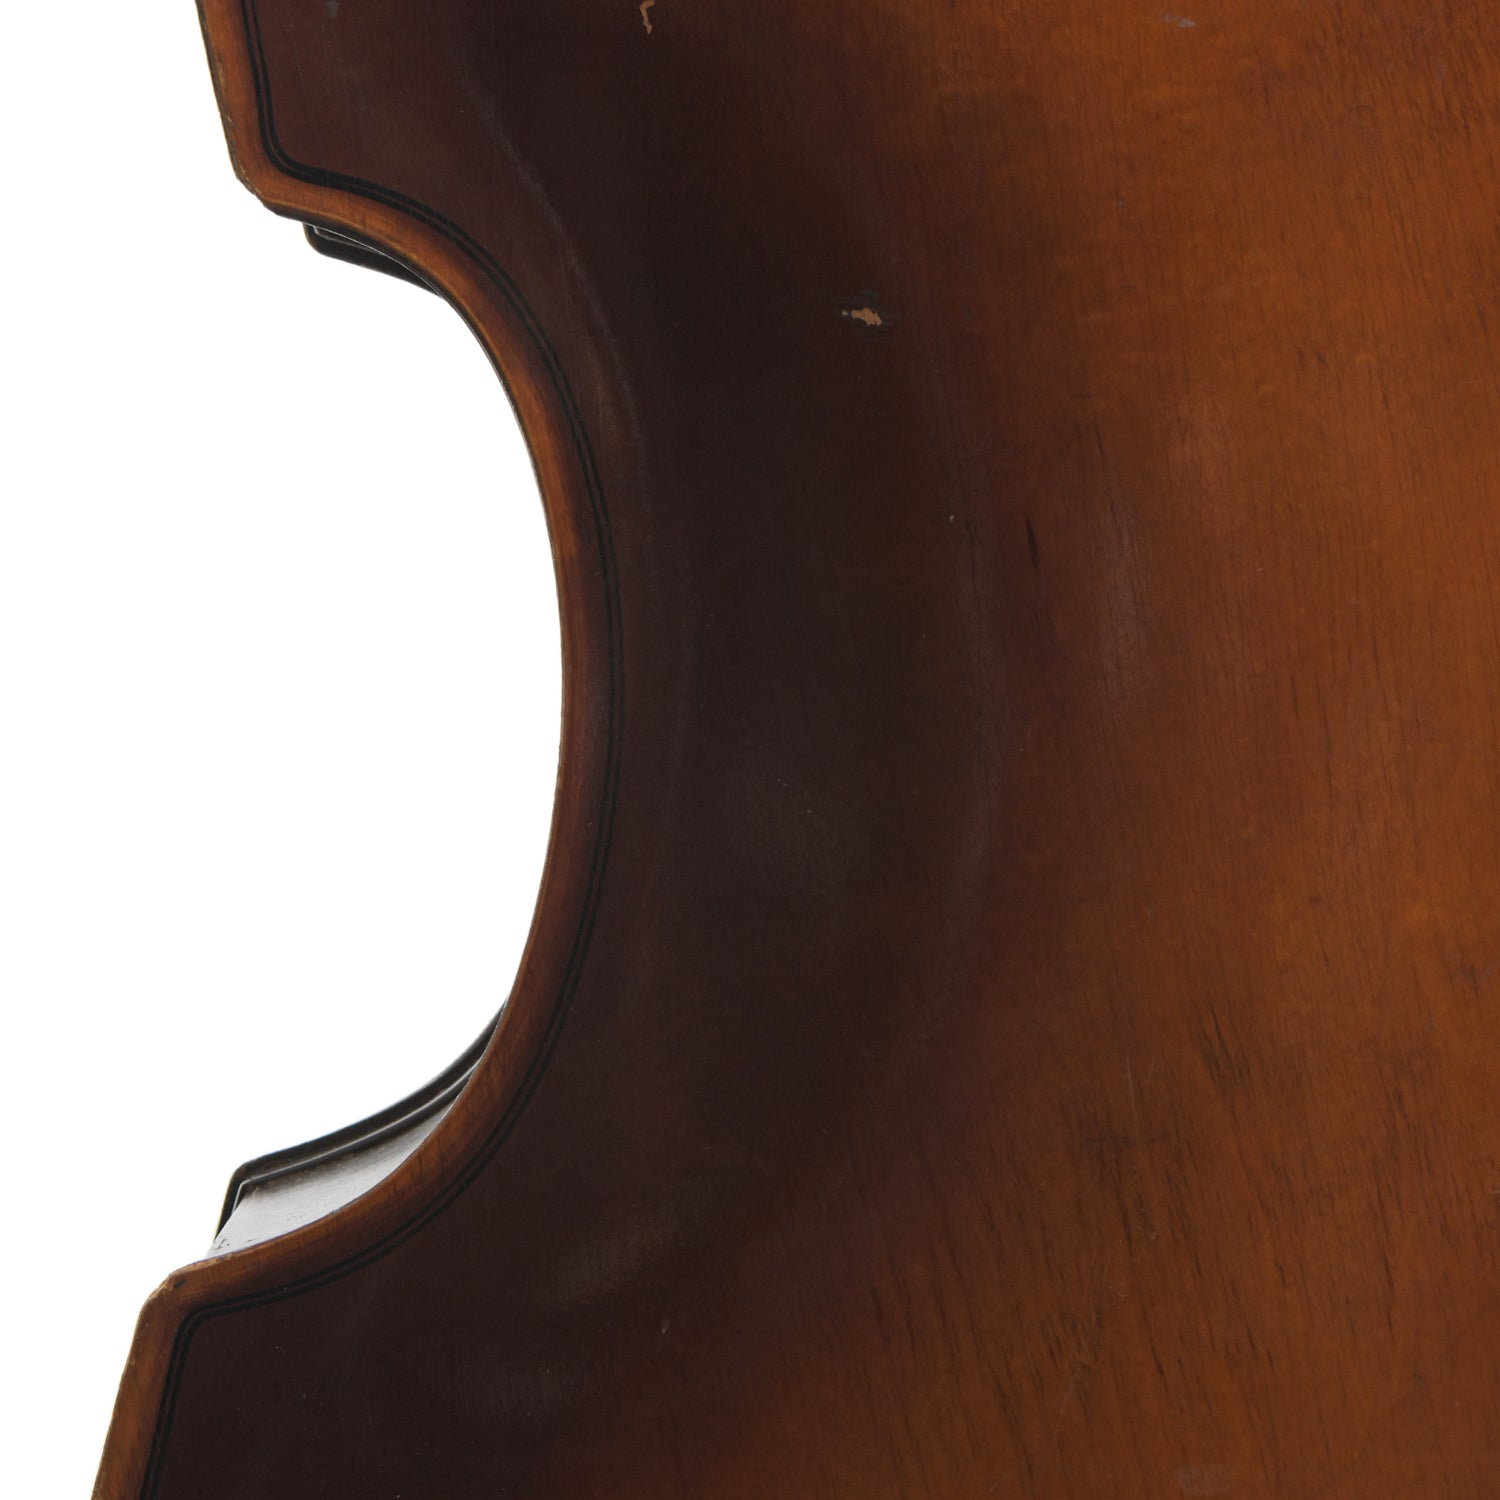 Back mid section of 1959 Kay C-1 Upright Bass 